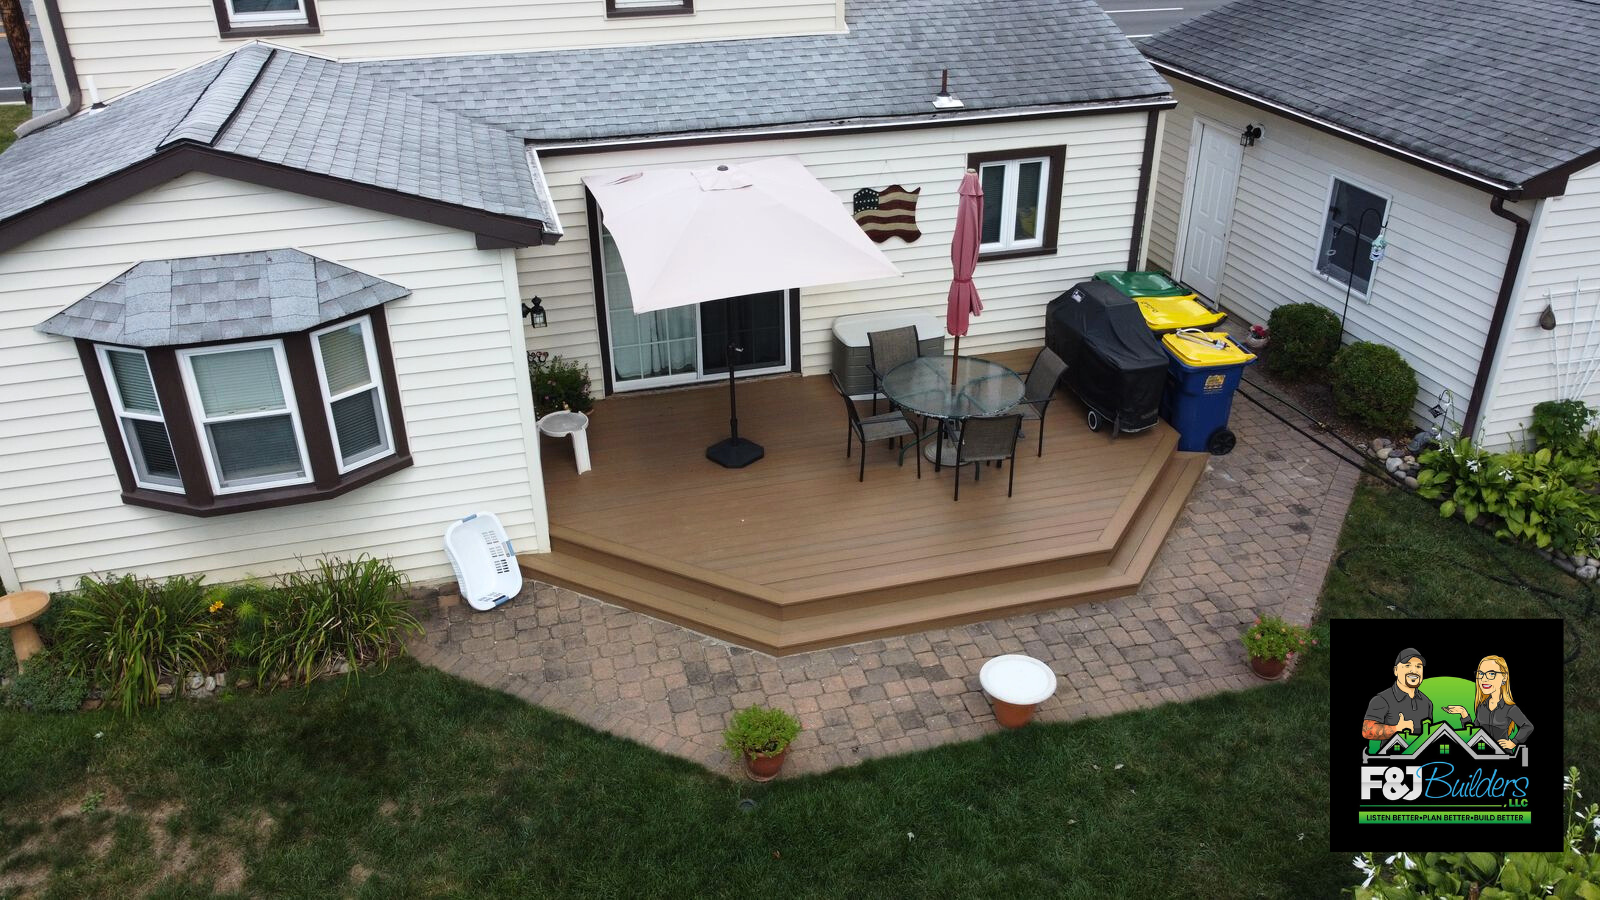 Deck installation by F&J Builders